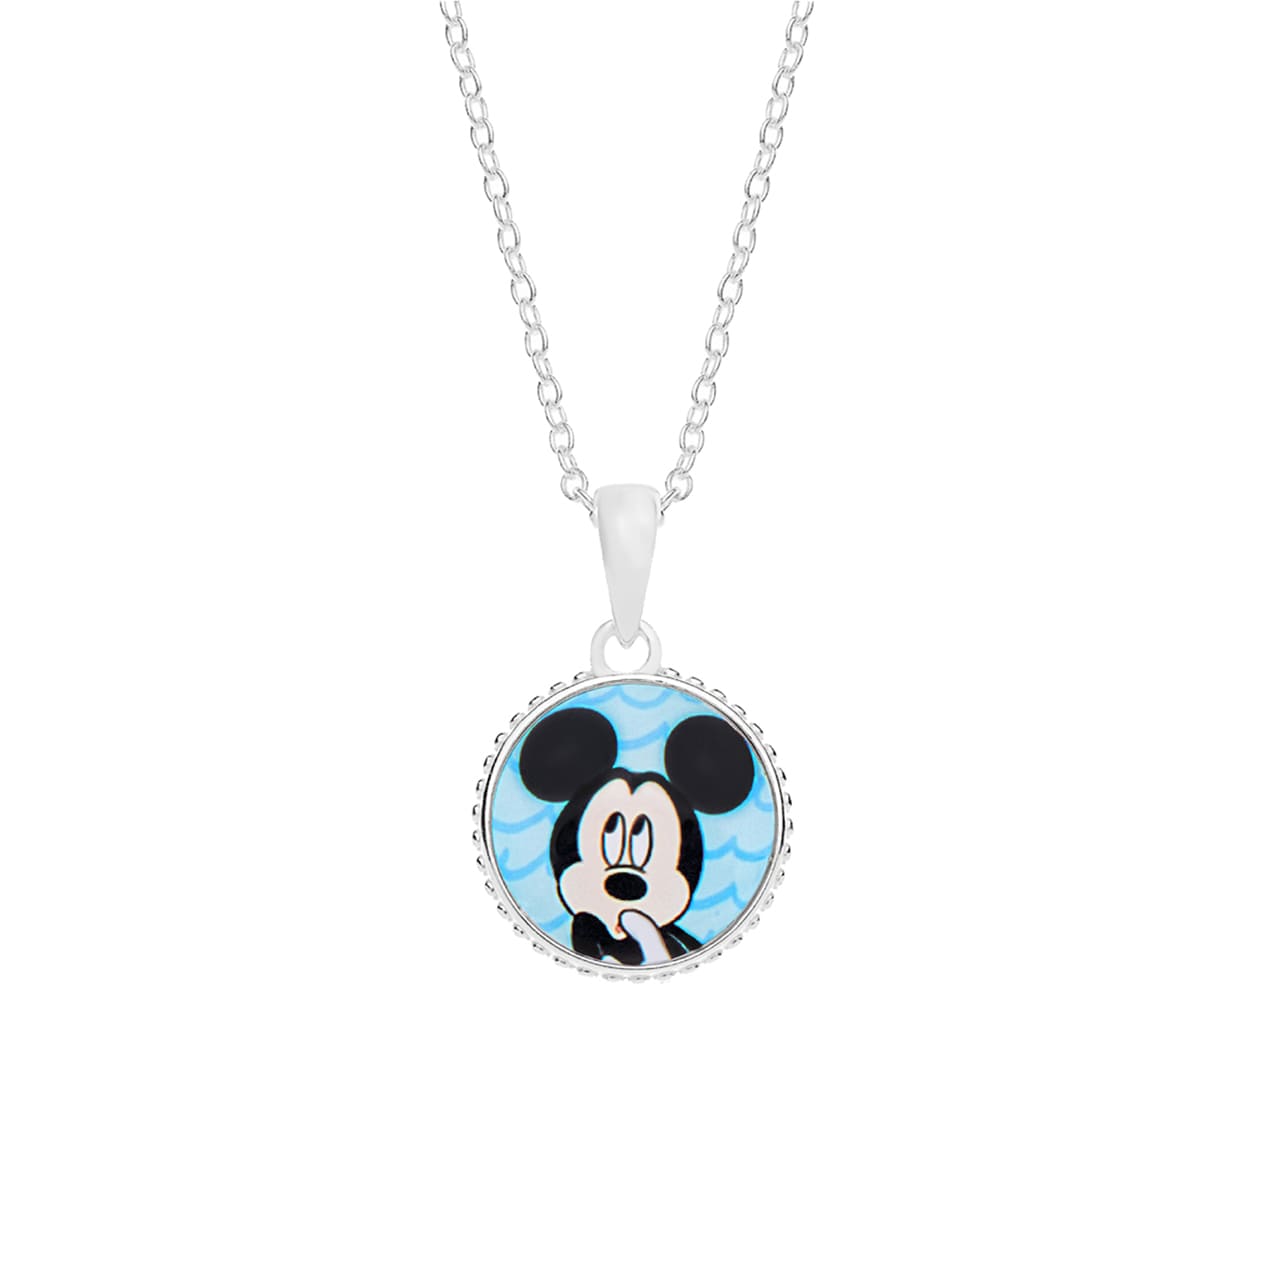 Disney_Halskette_Mickey_Mouse_Medaillon_Sterling_Silber_925_D9012